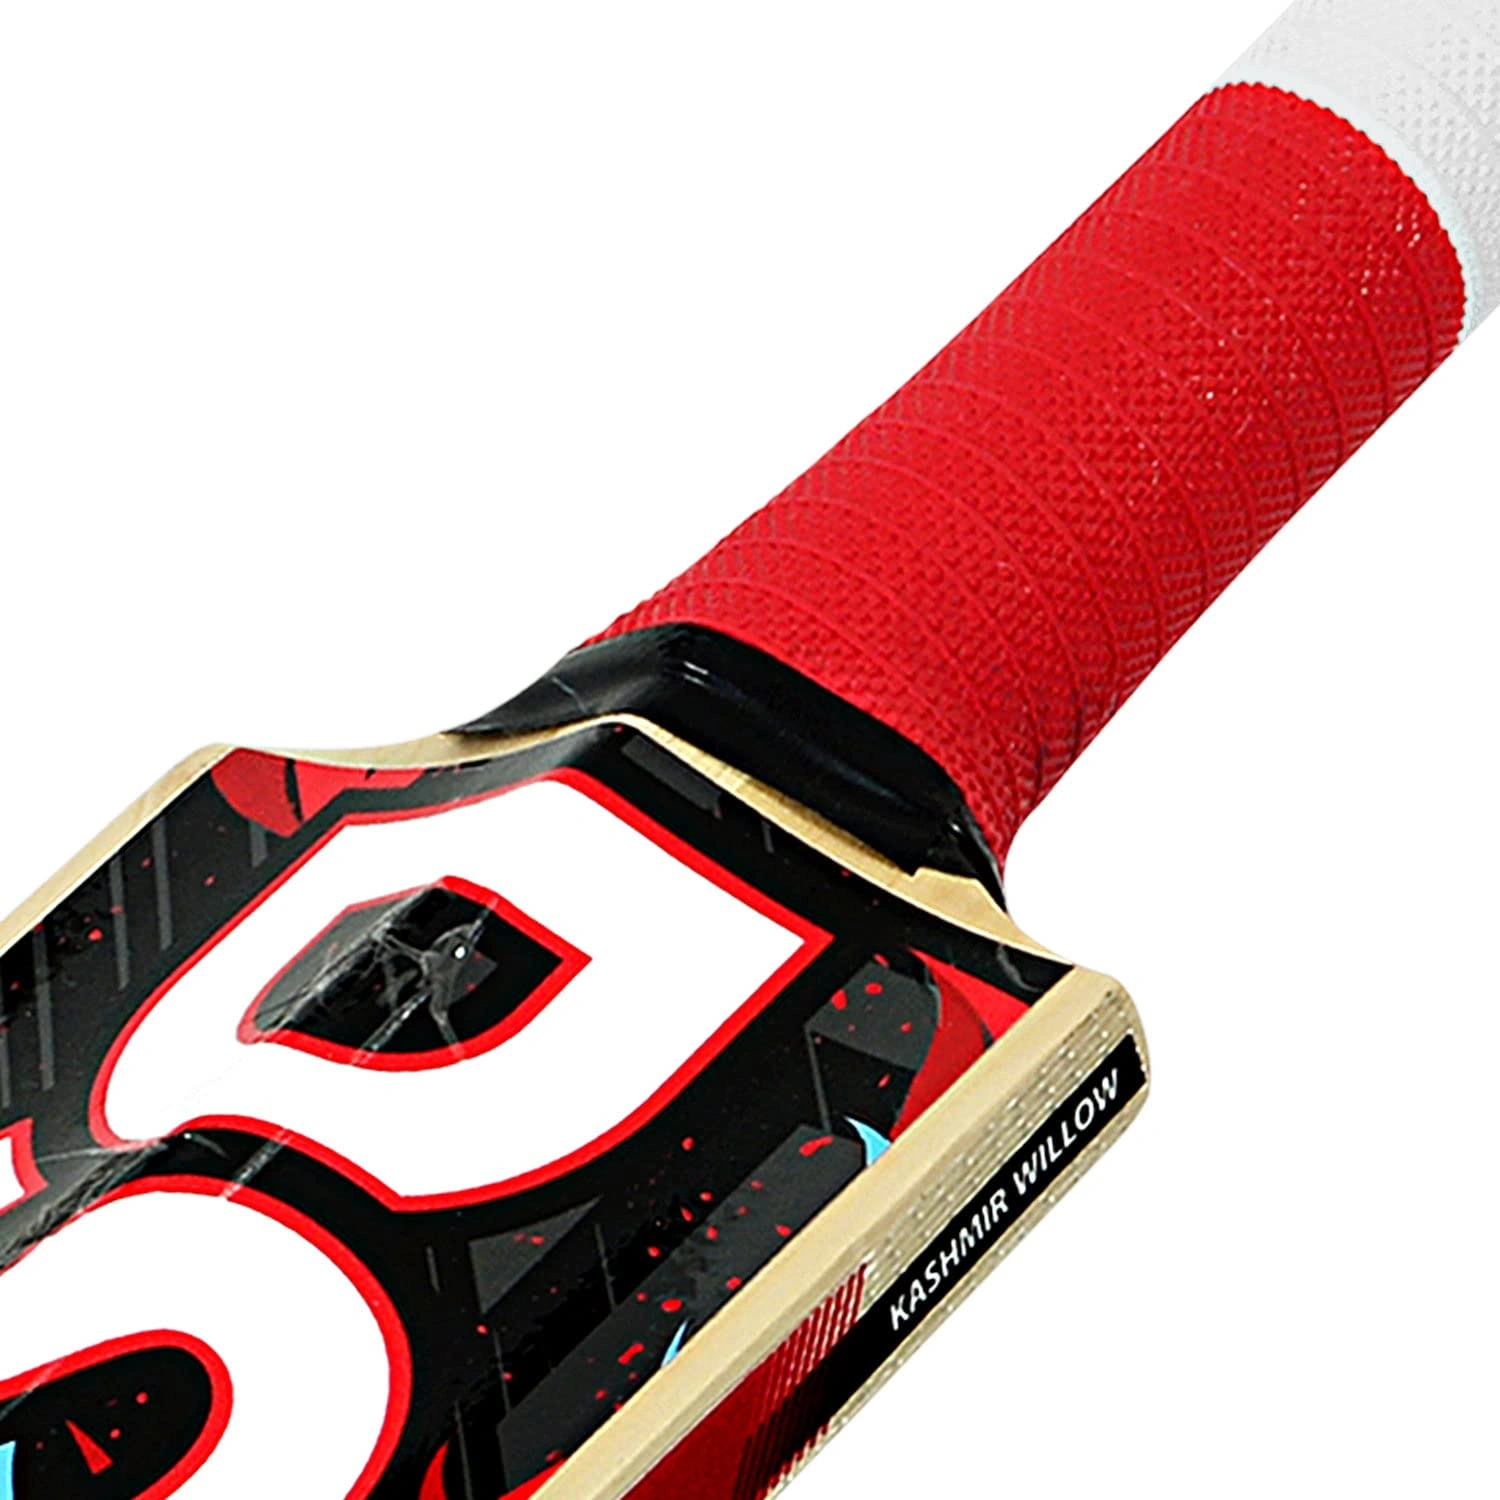 DSC Wildfire Scorcher Kashmir Willow Cricket Bat for Tennis Ball Cricket: Low Sweet Spot and Spine Profile for Powerful Shots-FS-3